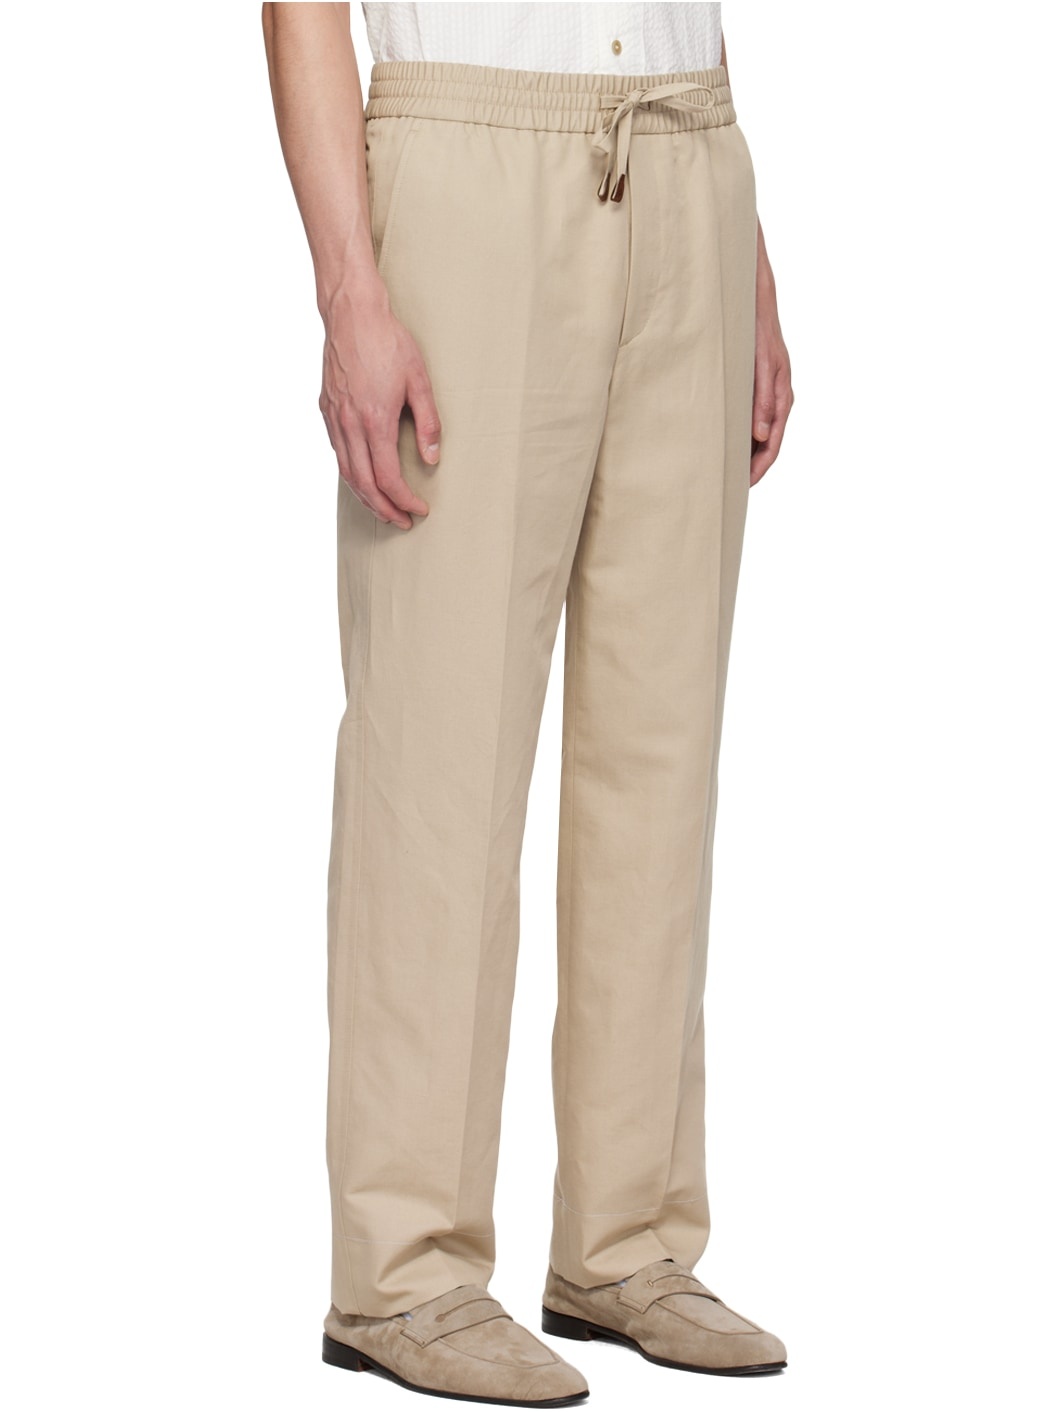 Taupe Asolo Trousers - 2